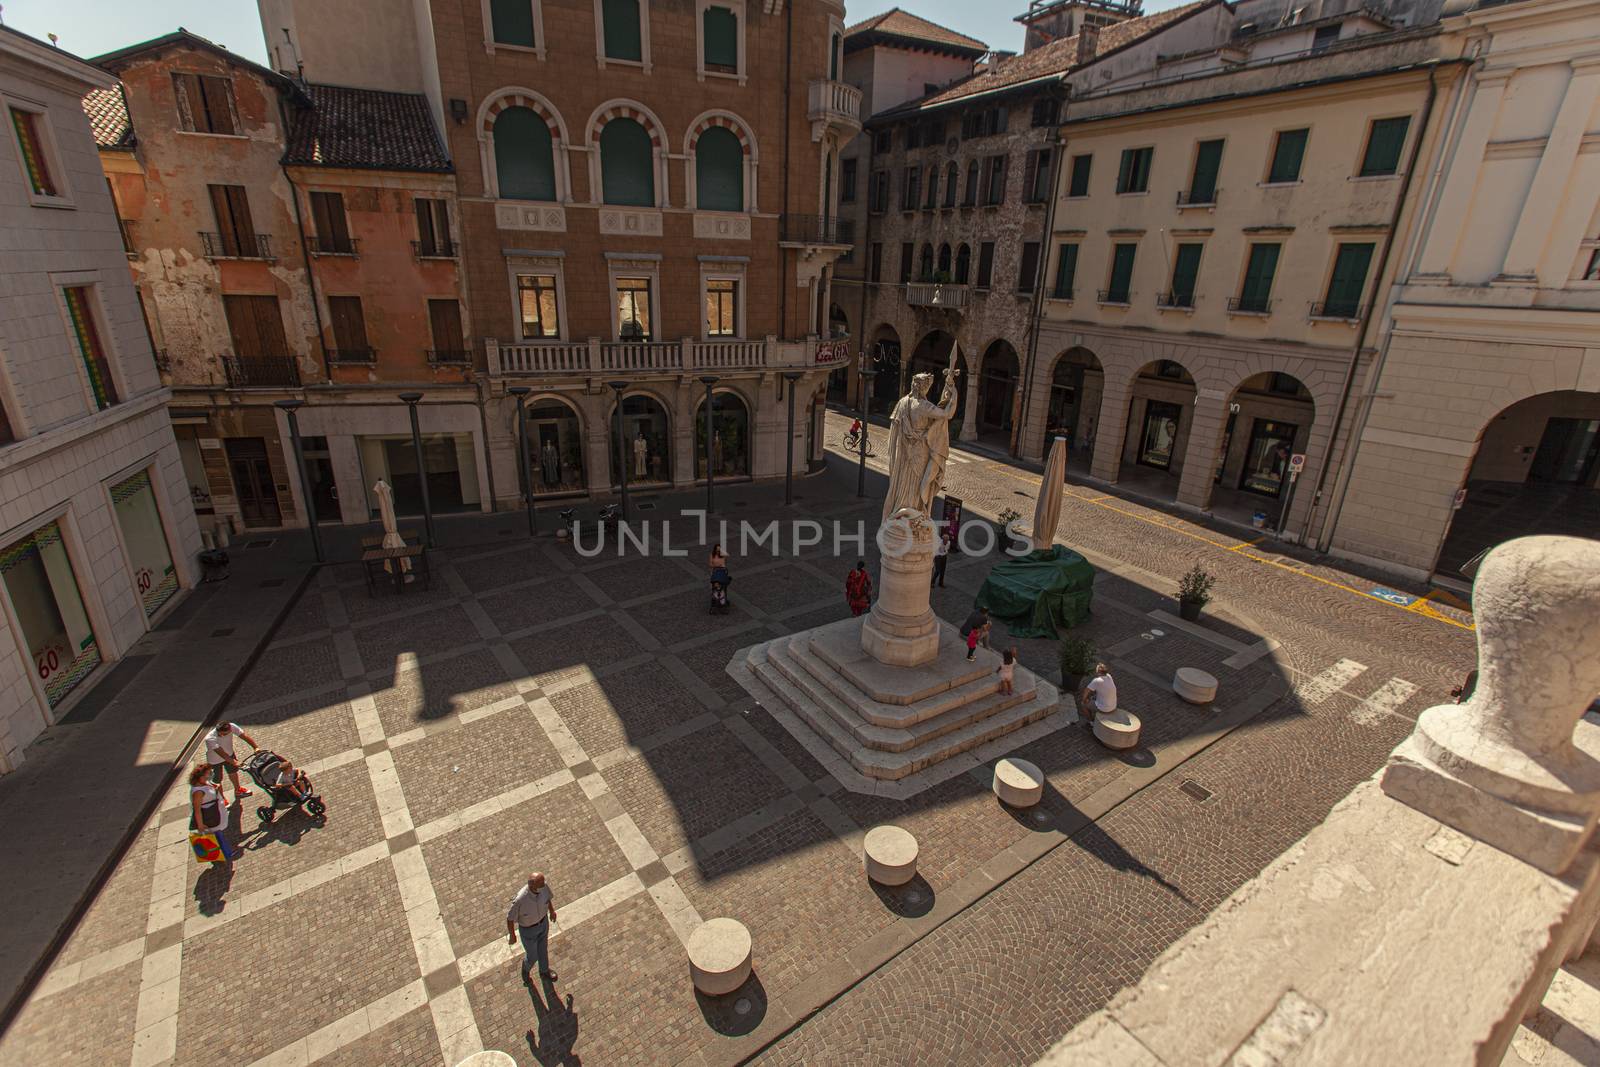 TREVISO, ITALY 13 AUGUST 2020: Piazza della libertà or liberty sqaure in english in Treviso in Italy